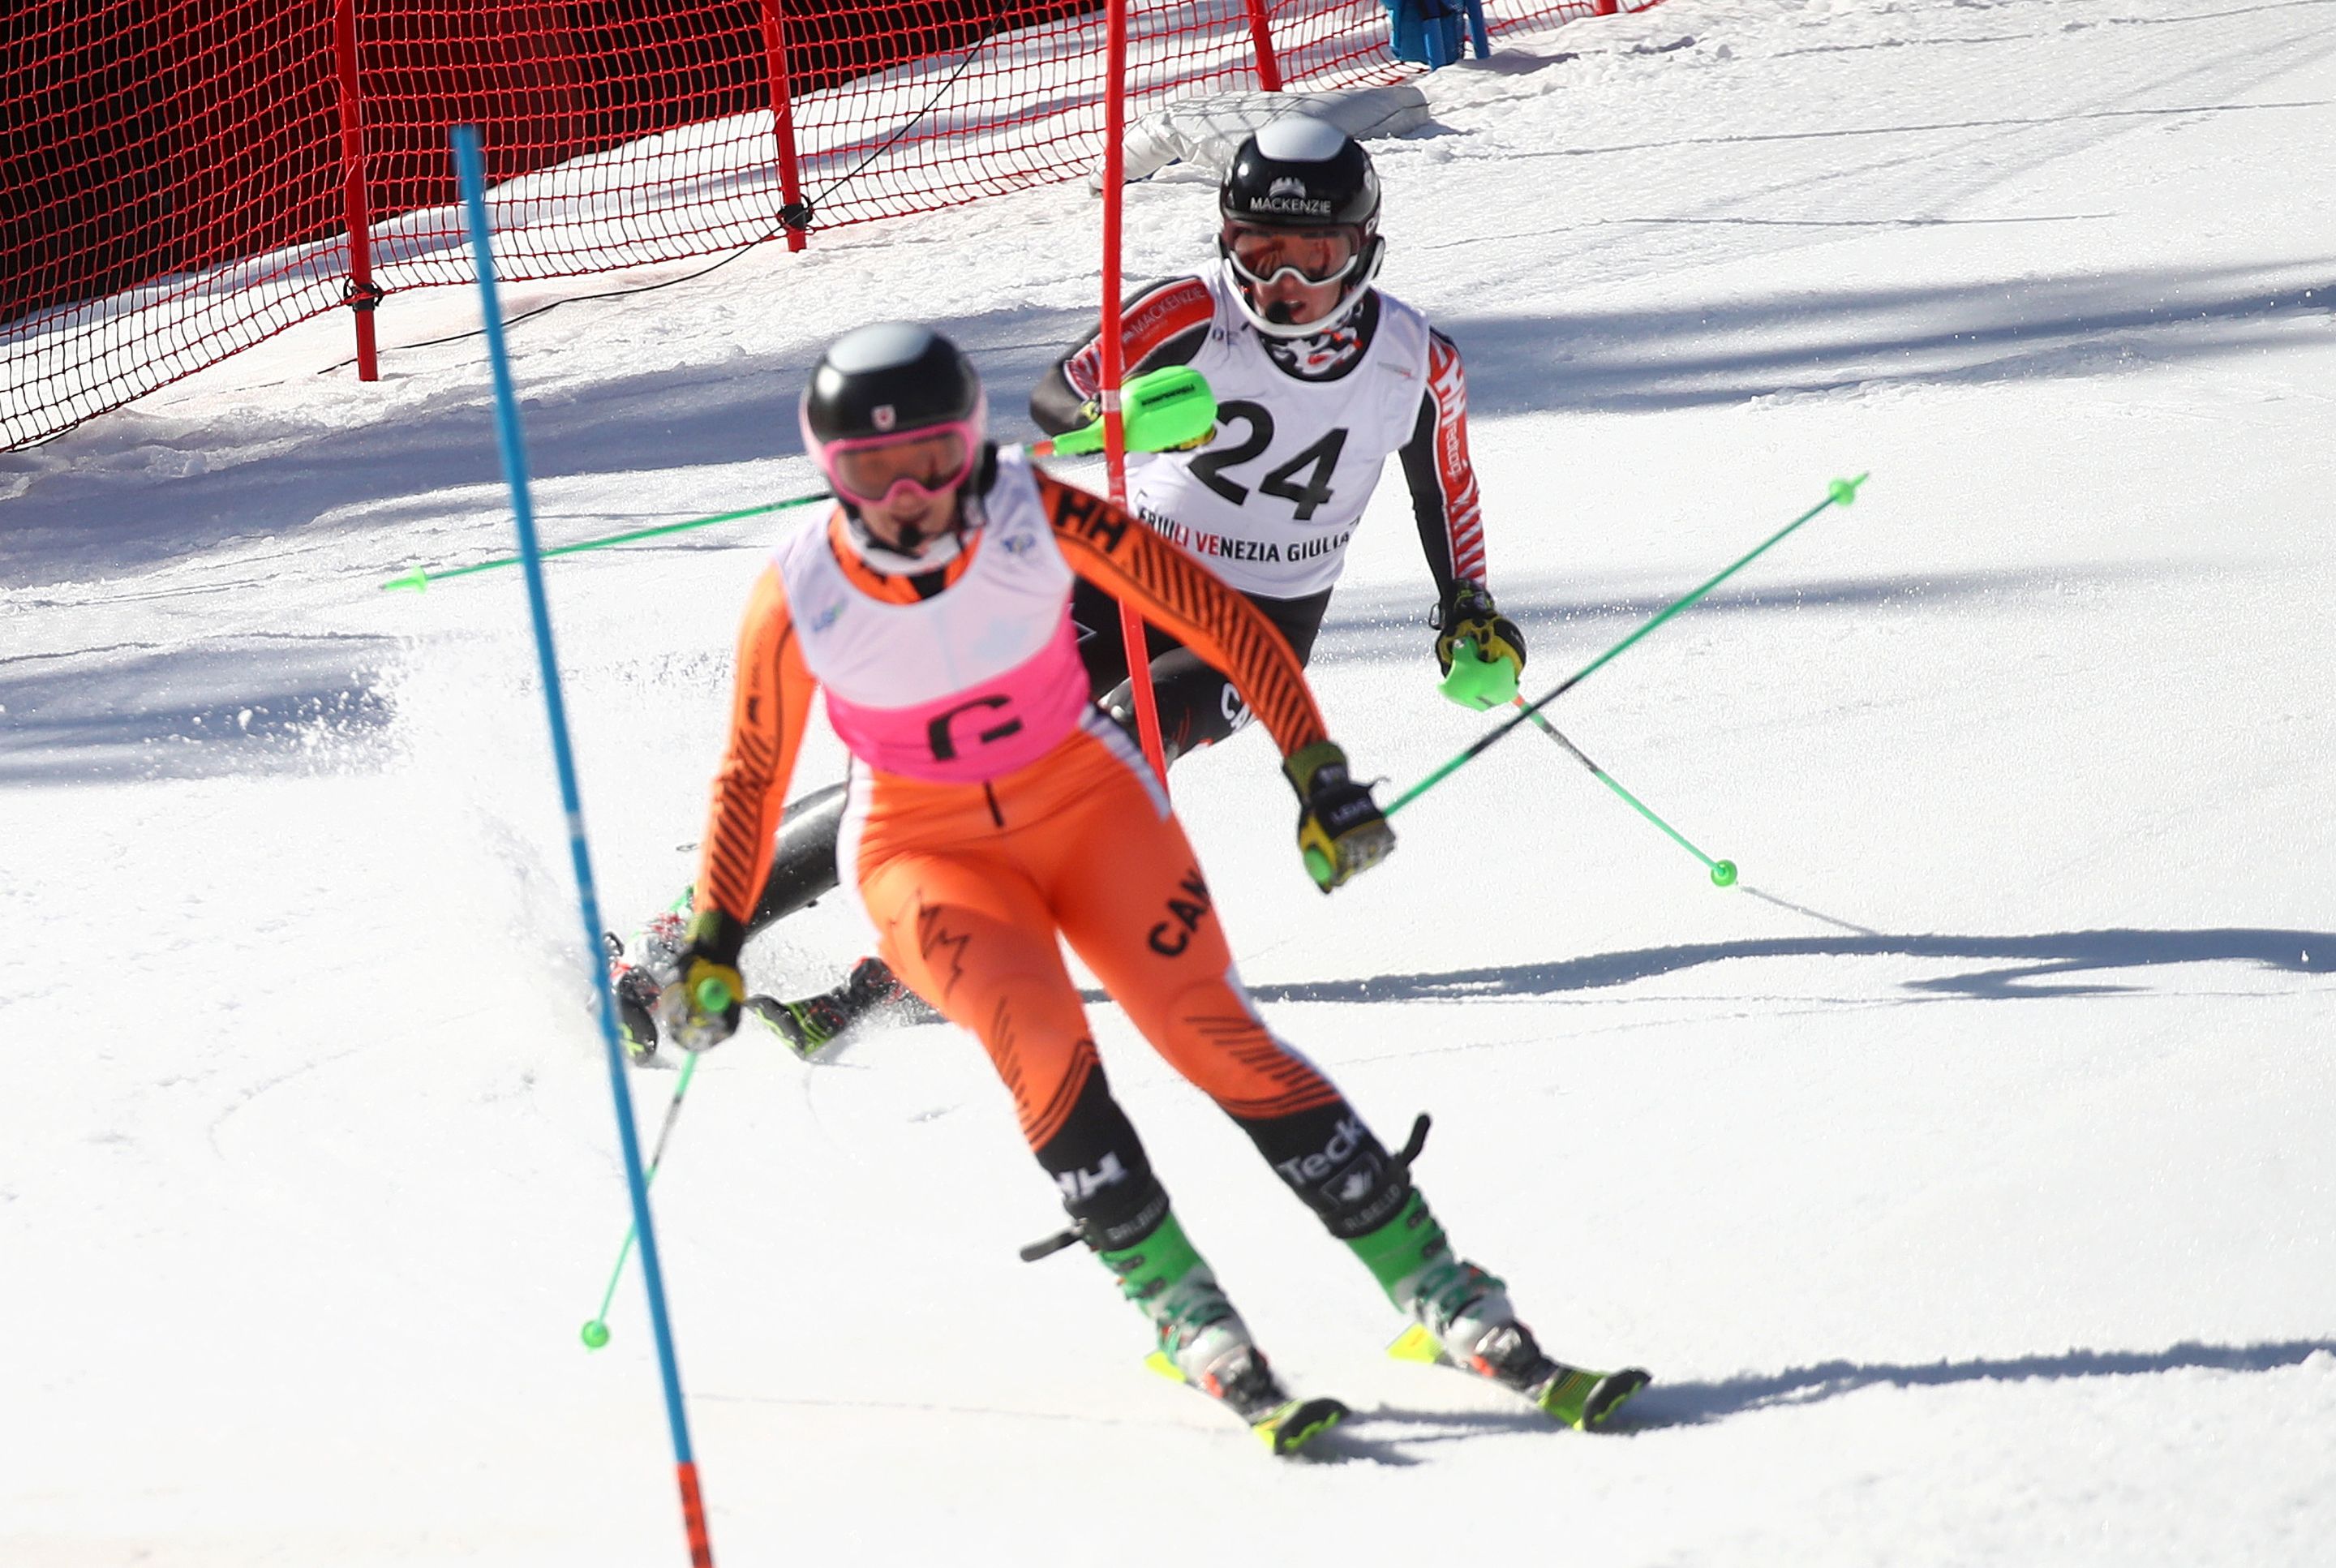 Sierra Smith (CAN) and Kalle Ericsson (CAN) in action during the first run of the slalom in Sella Nevea